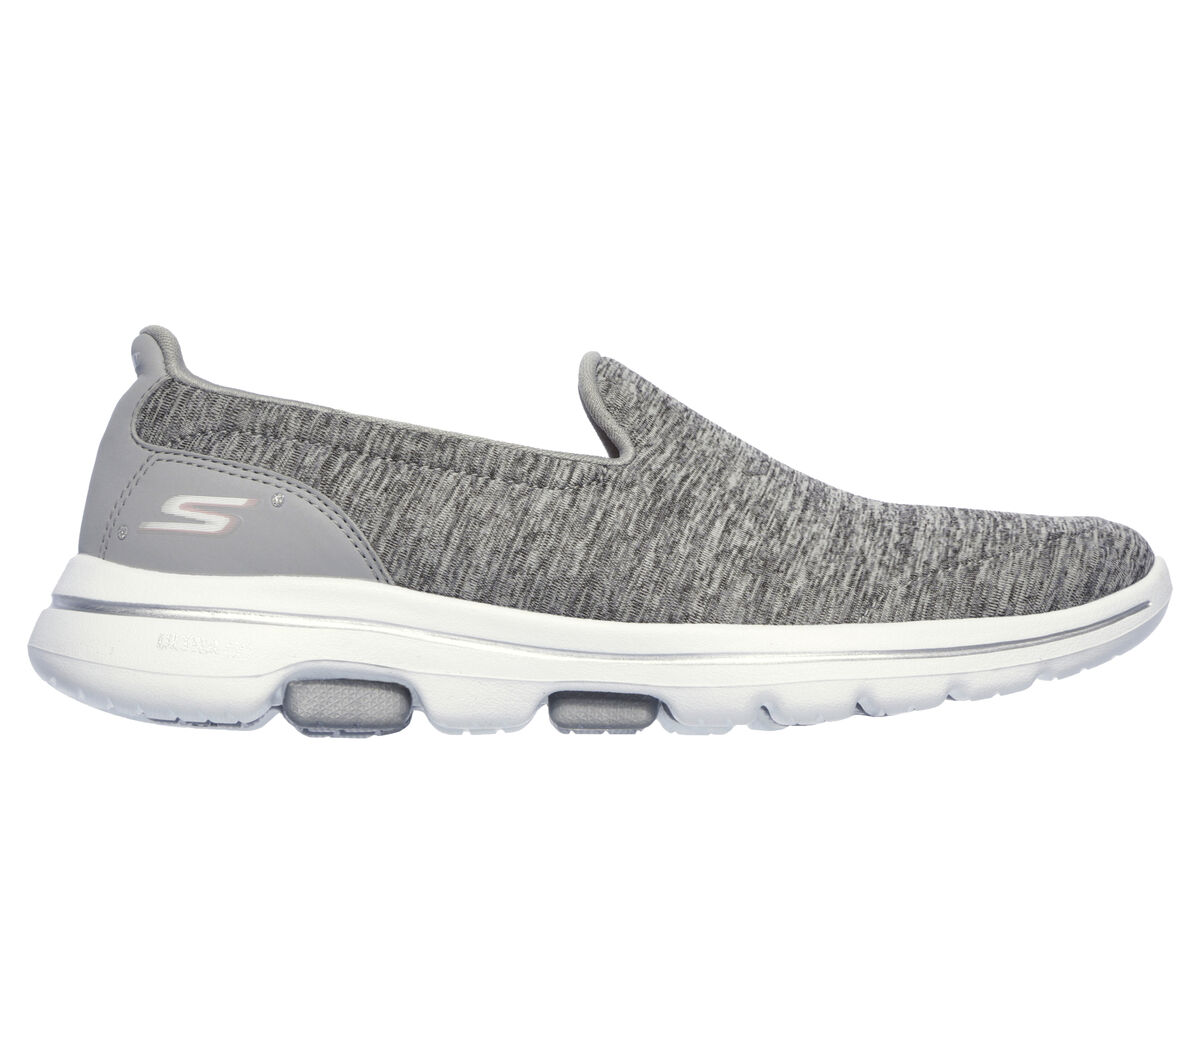 SKECHERS - SKECHERS GOWALK 5 – PERFECT The leaders in walking shoe  technology continue to innovate with the Skechers GOwalk 5™ - Perfect.  Features lightweight, responsive ULTRA GO™ cushioning and high-rebound  COMFORT